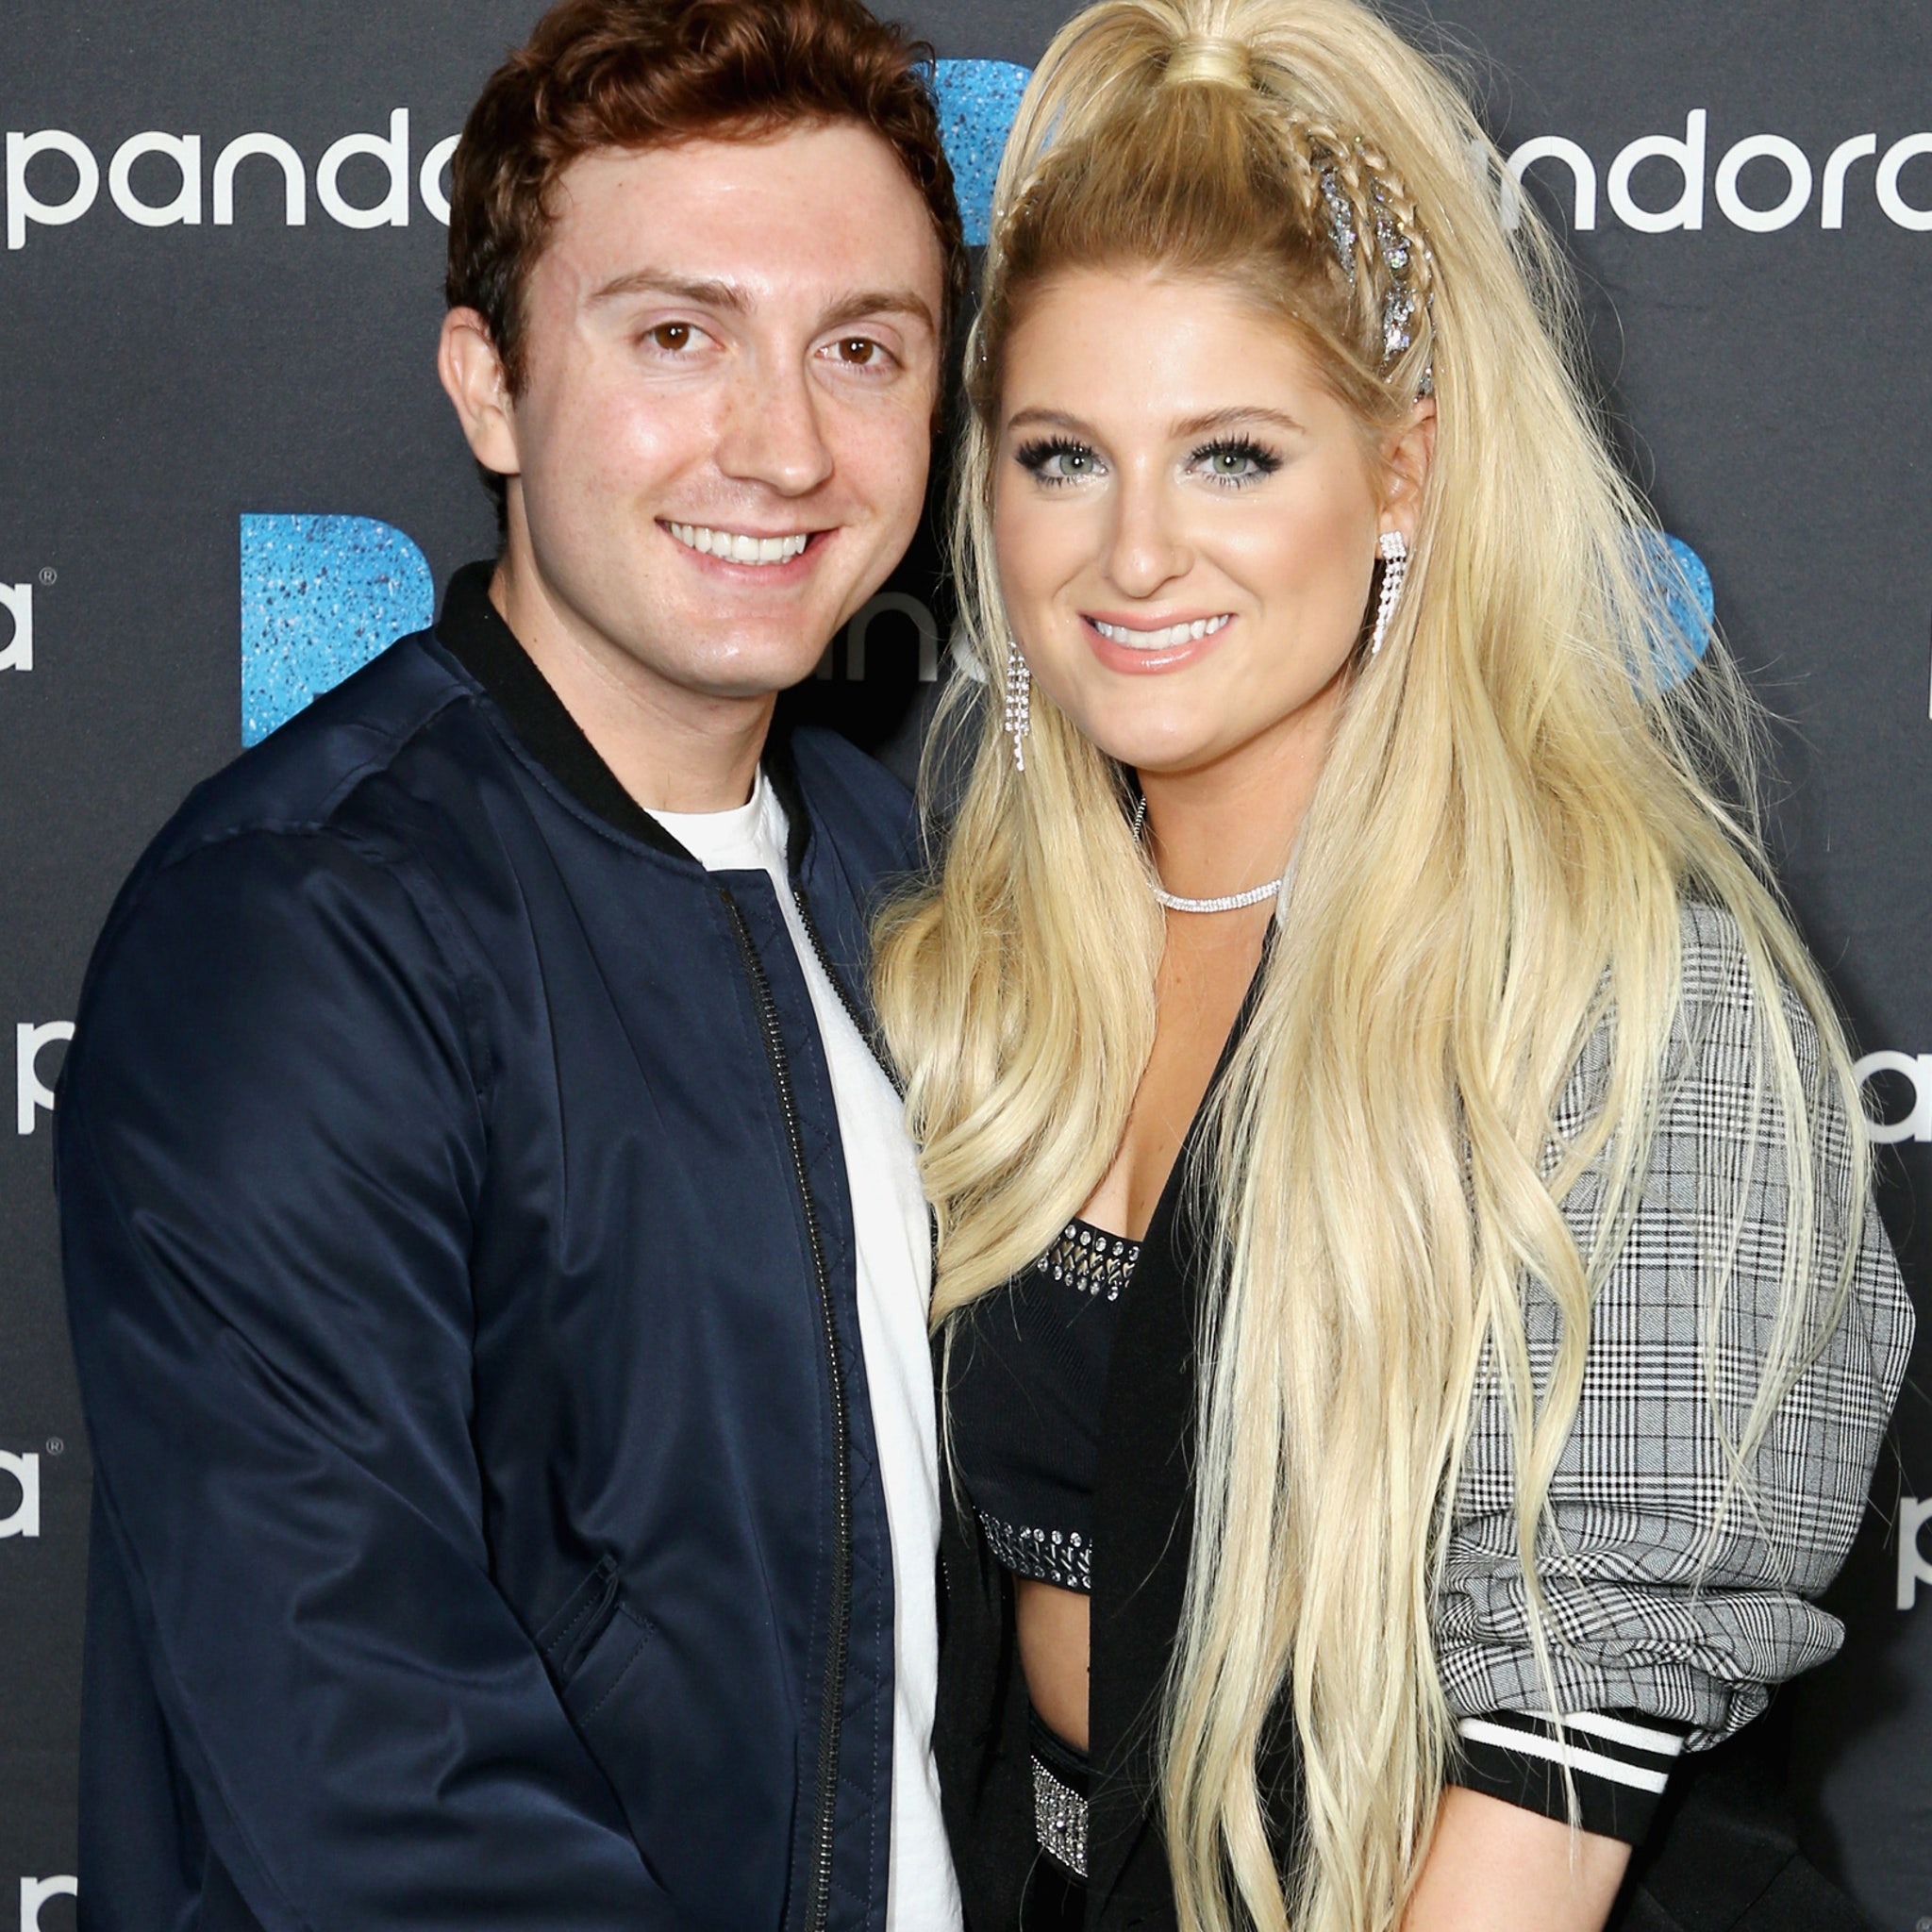 Meghan Trainor shares emotional video of son's 'rocky start